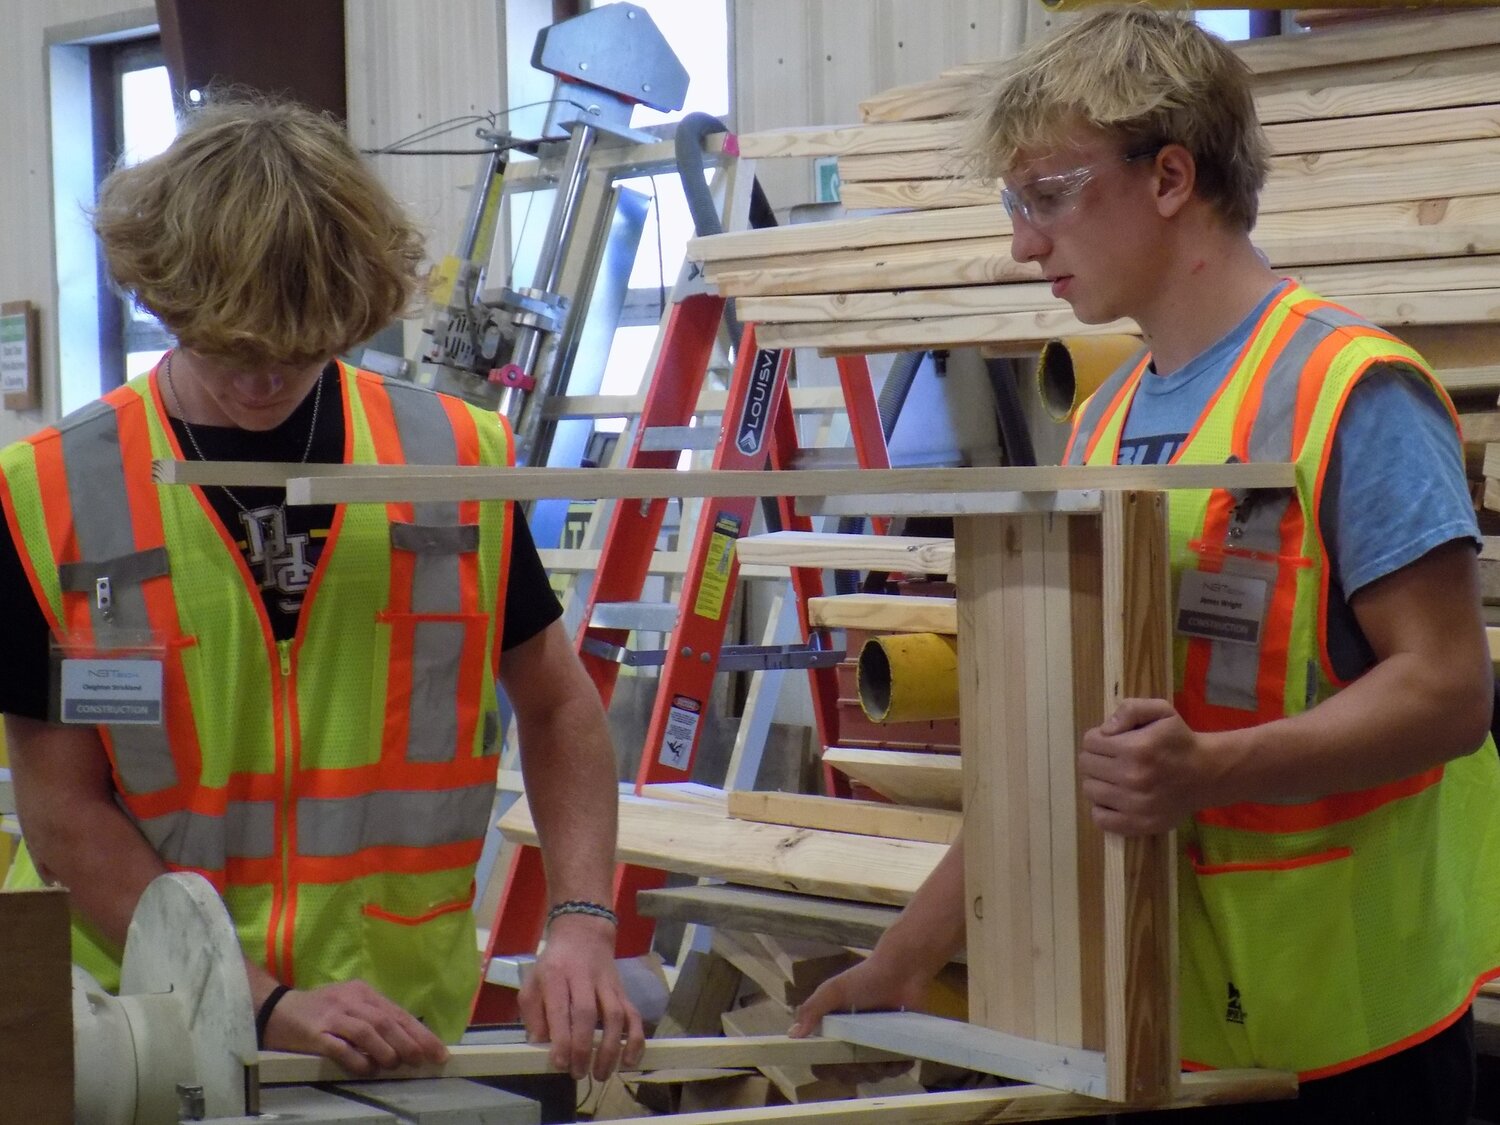 Students working on an assignment in Larson's carpentry and construction class at the North Baldwin Center for Technology in Bay Minette.